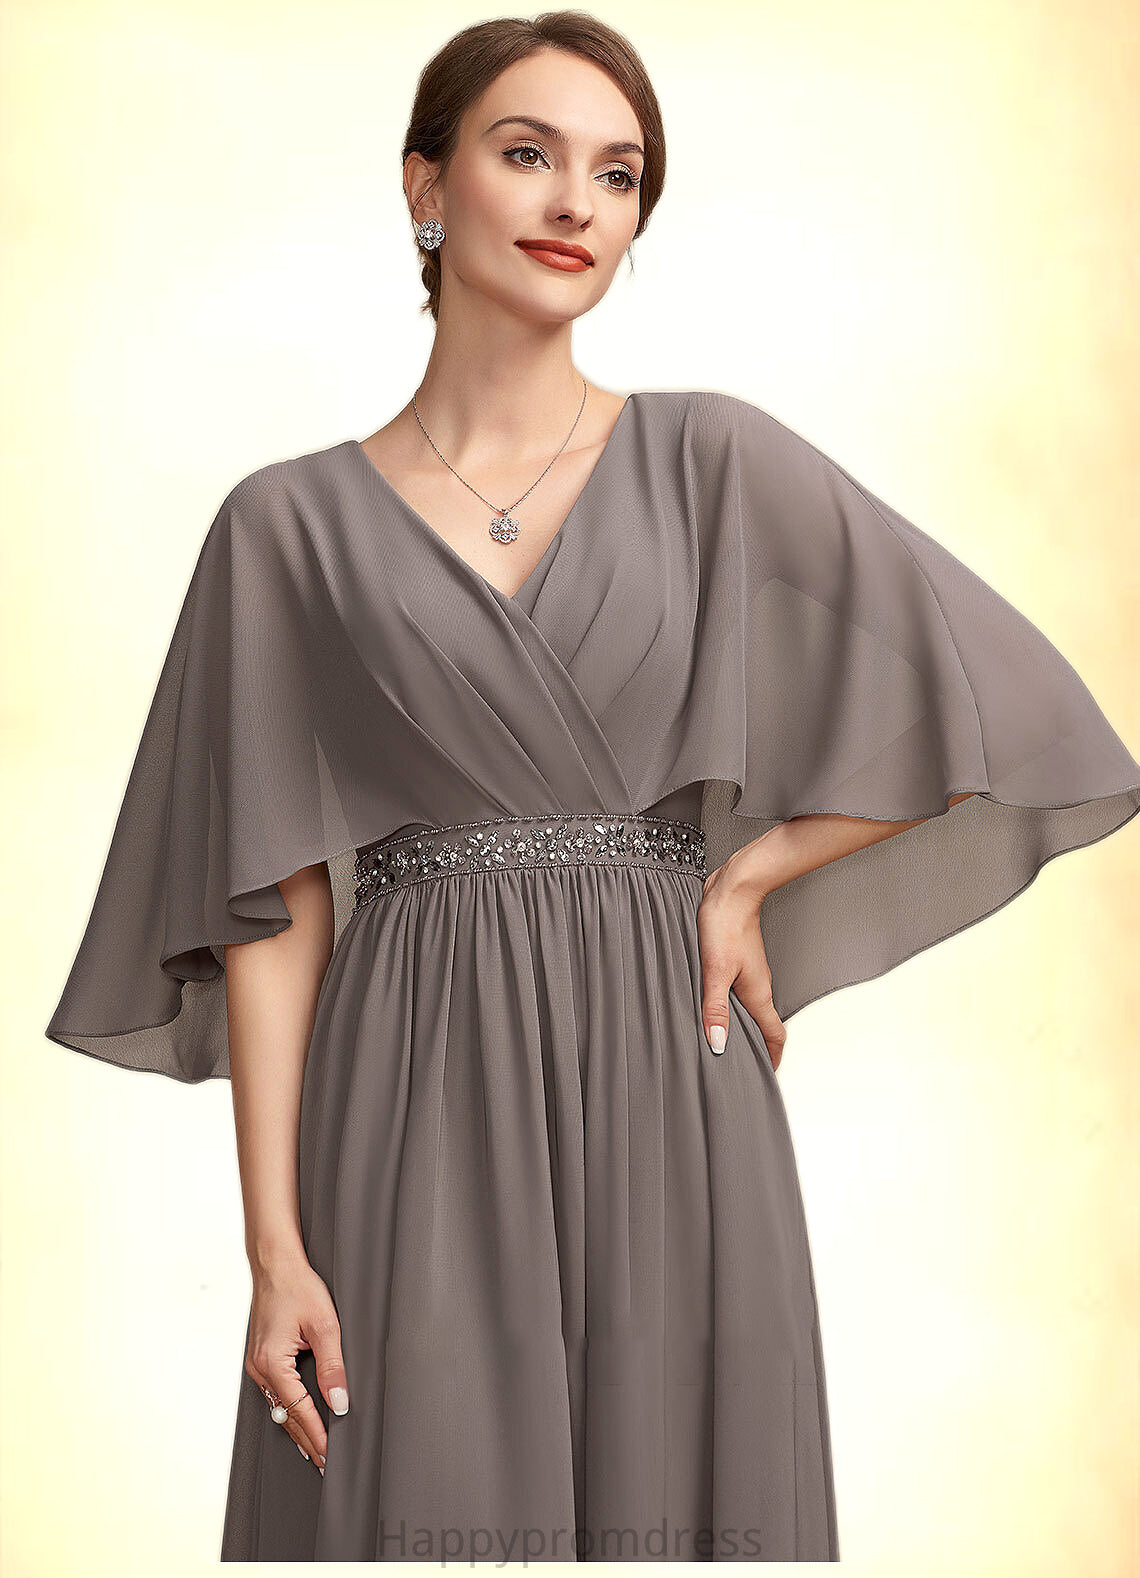 Kennedy A-Line V-neck Ankle-Length Chiffon Mother of the Bride Dress With Ruffle Beading XXS126P0014723